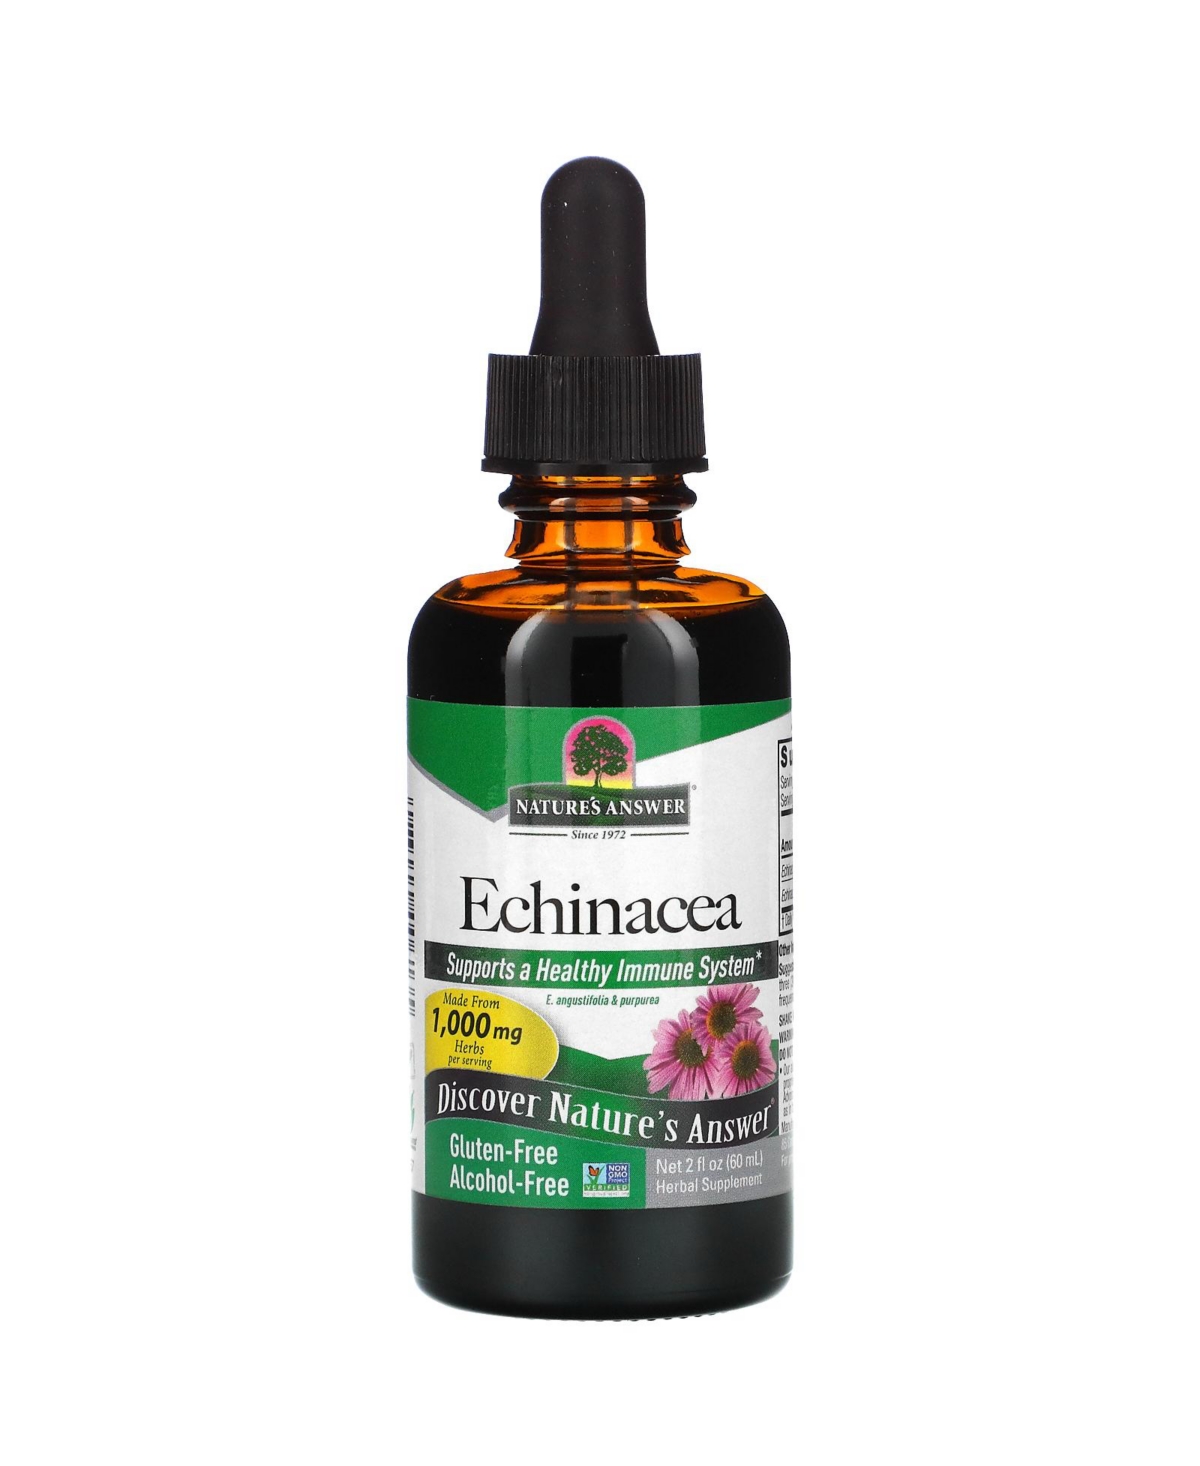 Echinacea Alcohol-Free 1000 mg - 2 fl oz (60 ml) - Assorted Pre-pack (See Table